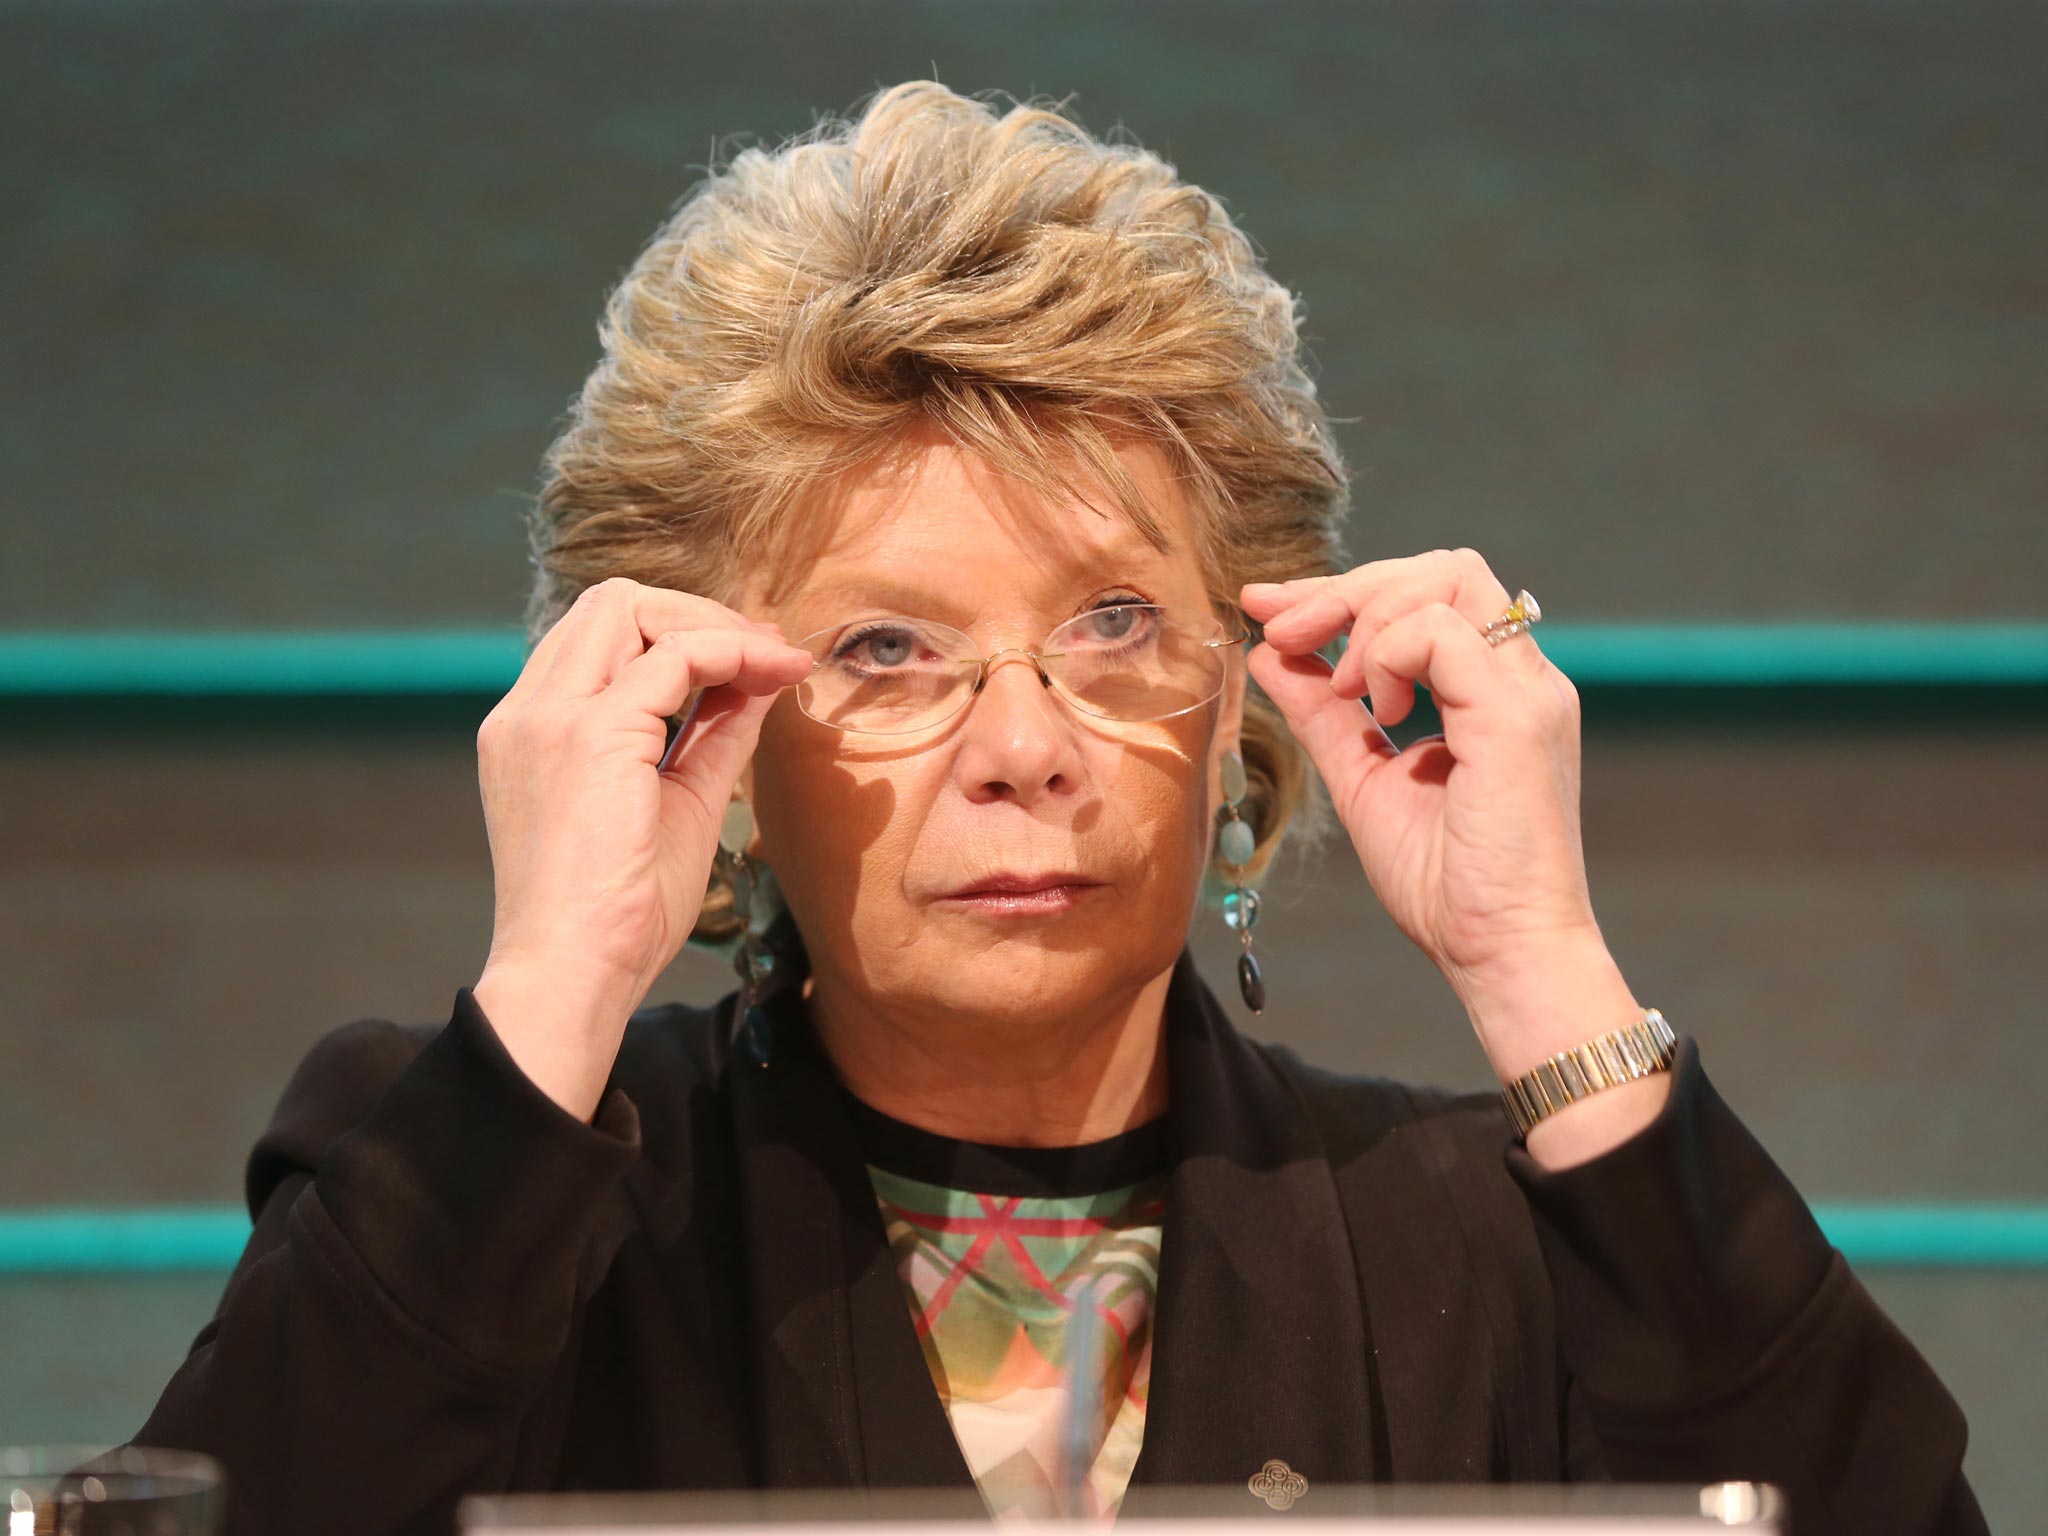 European Commission vice-president Viviane Reding says that Britain needs to focus on education and welfare